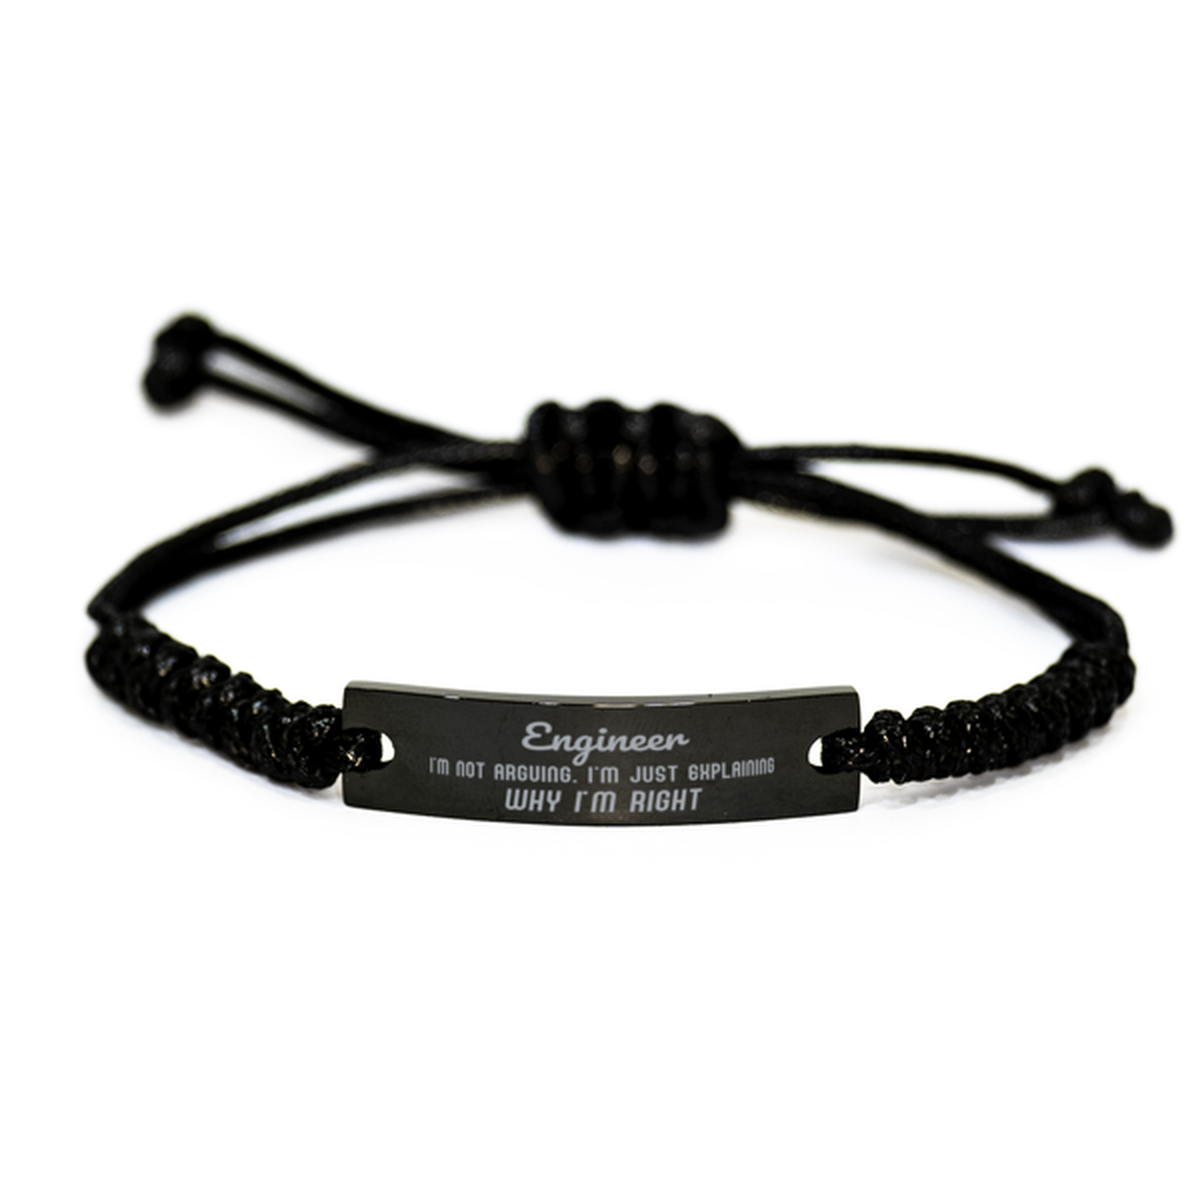 Engineer I'm not Arguing. I'm Just Explaining Why I'm RIGHT Black Rope Bracelet, Funny Saying Quote Engineer Gifts For Engineer Graduation Birthday Christmas Gifts for Men Women Coworker